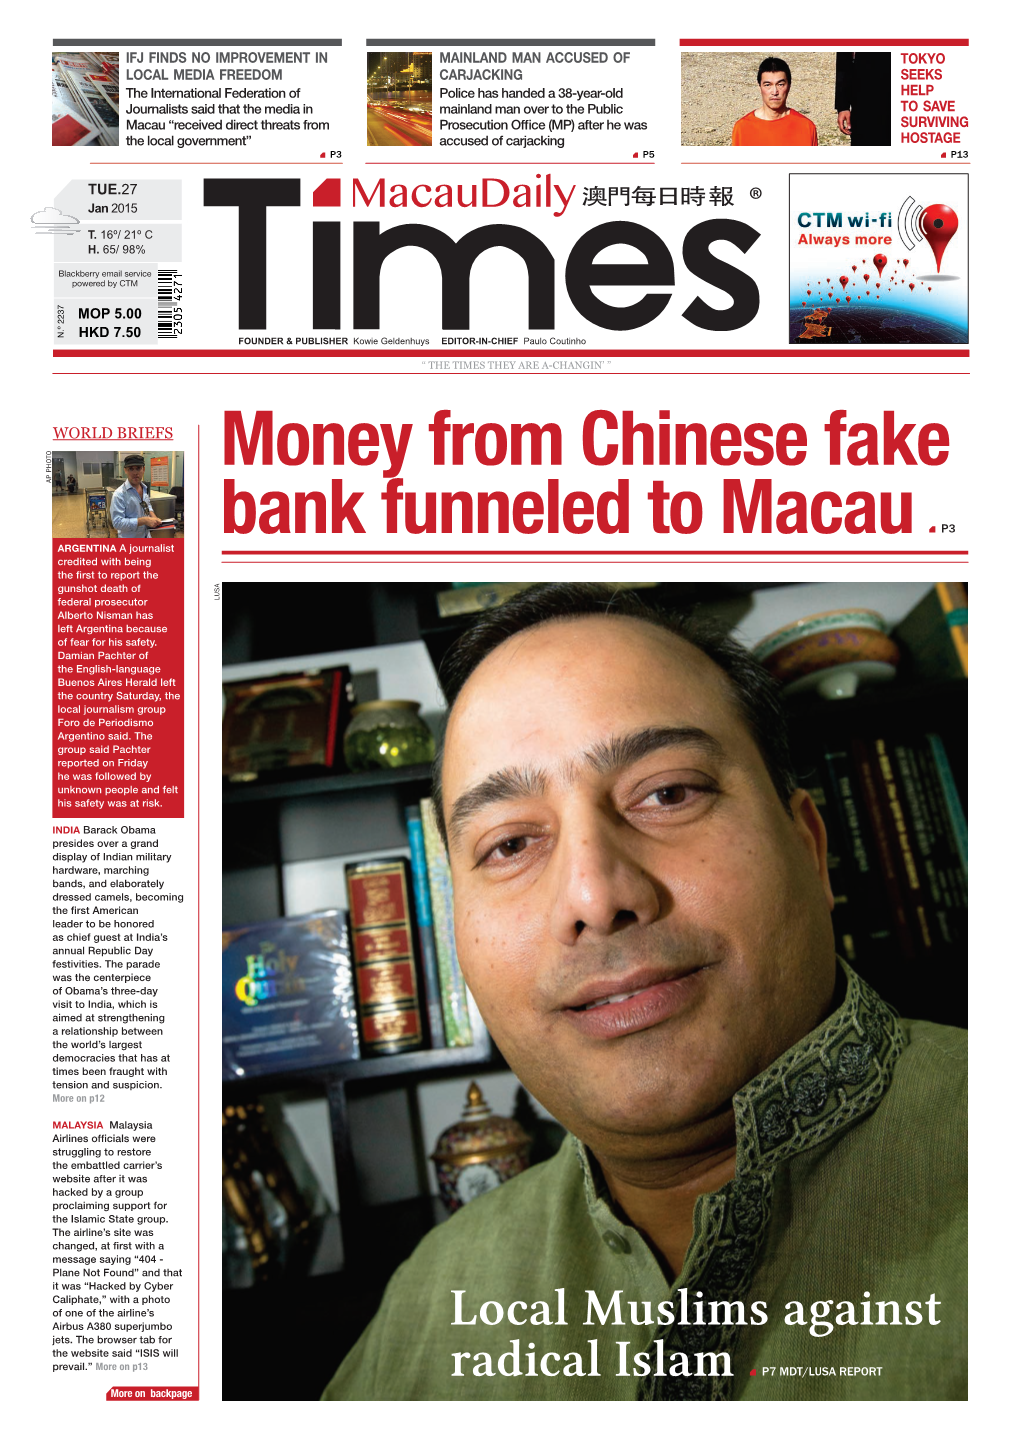 Money from Chinese Fake Bank Funneled to Macau